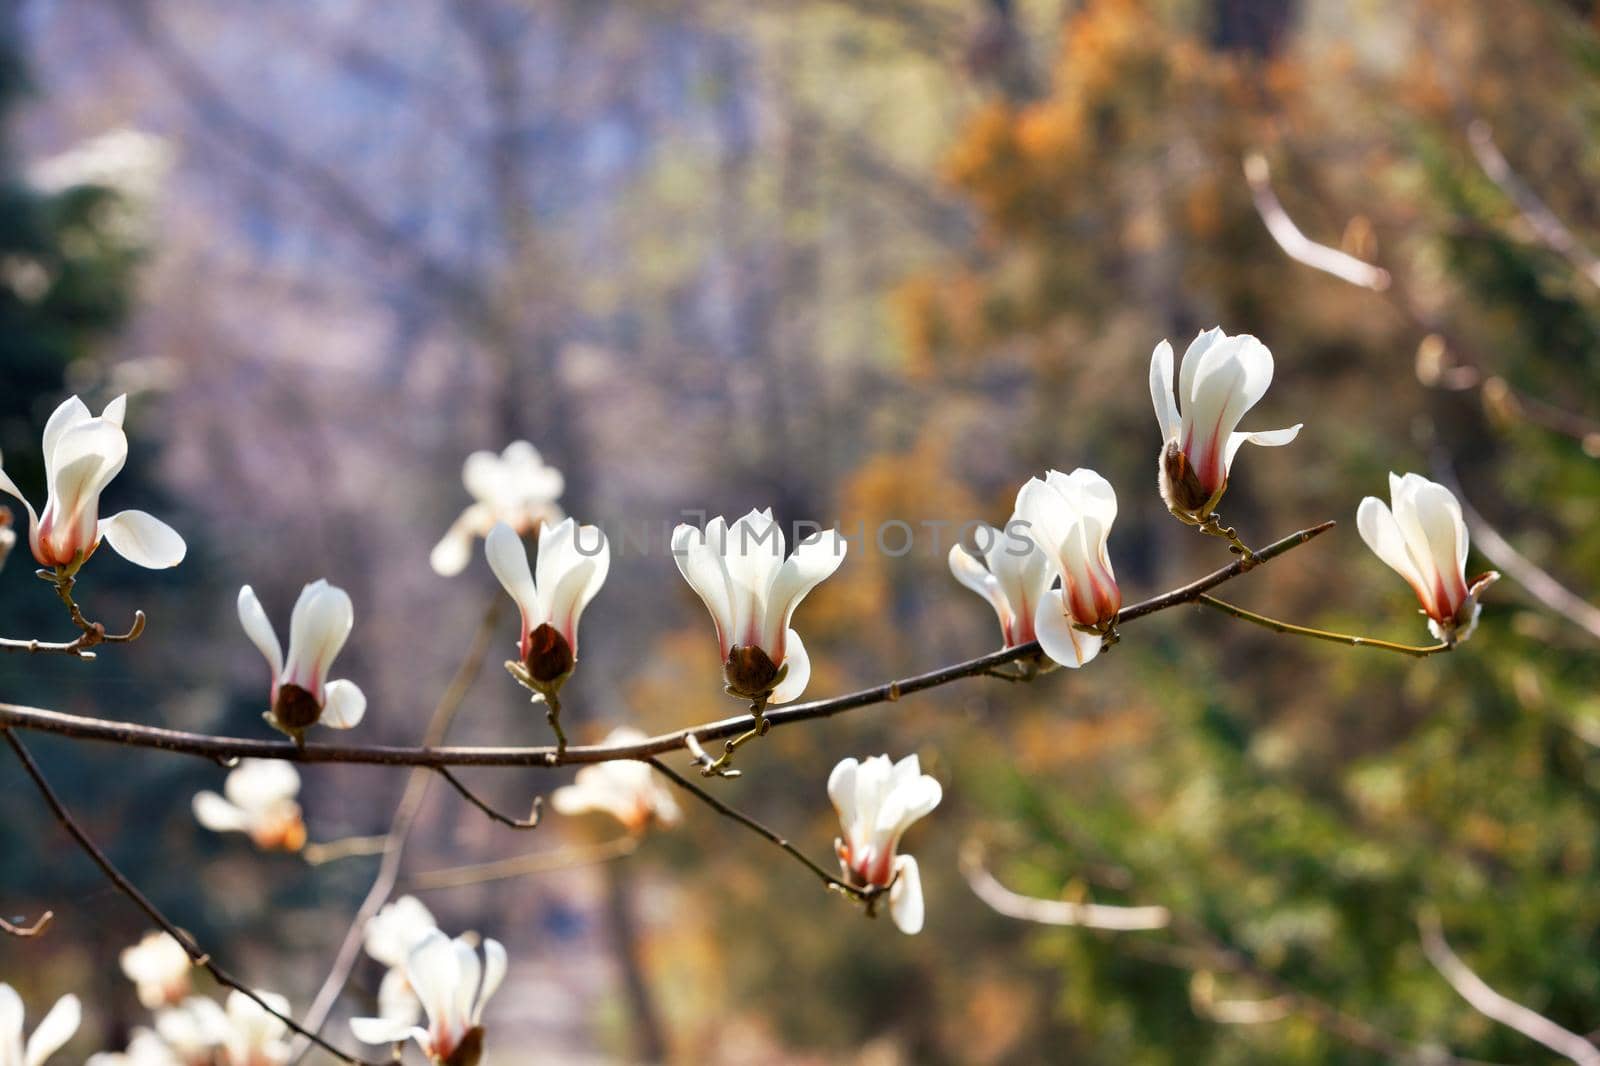 Graceful branch with white magnolia flowers in the spring garden. by Sergii